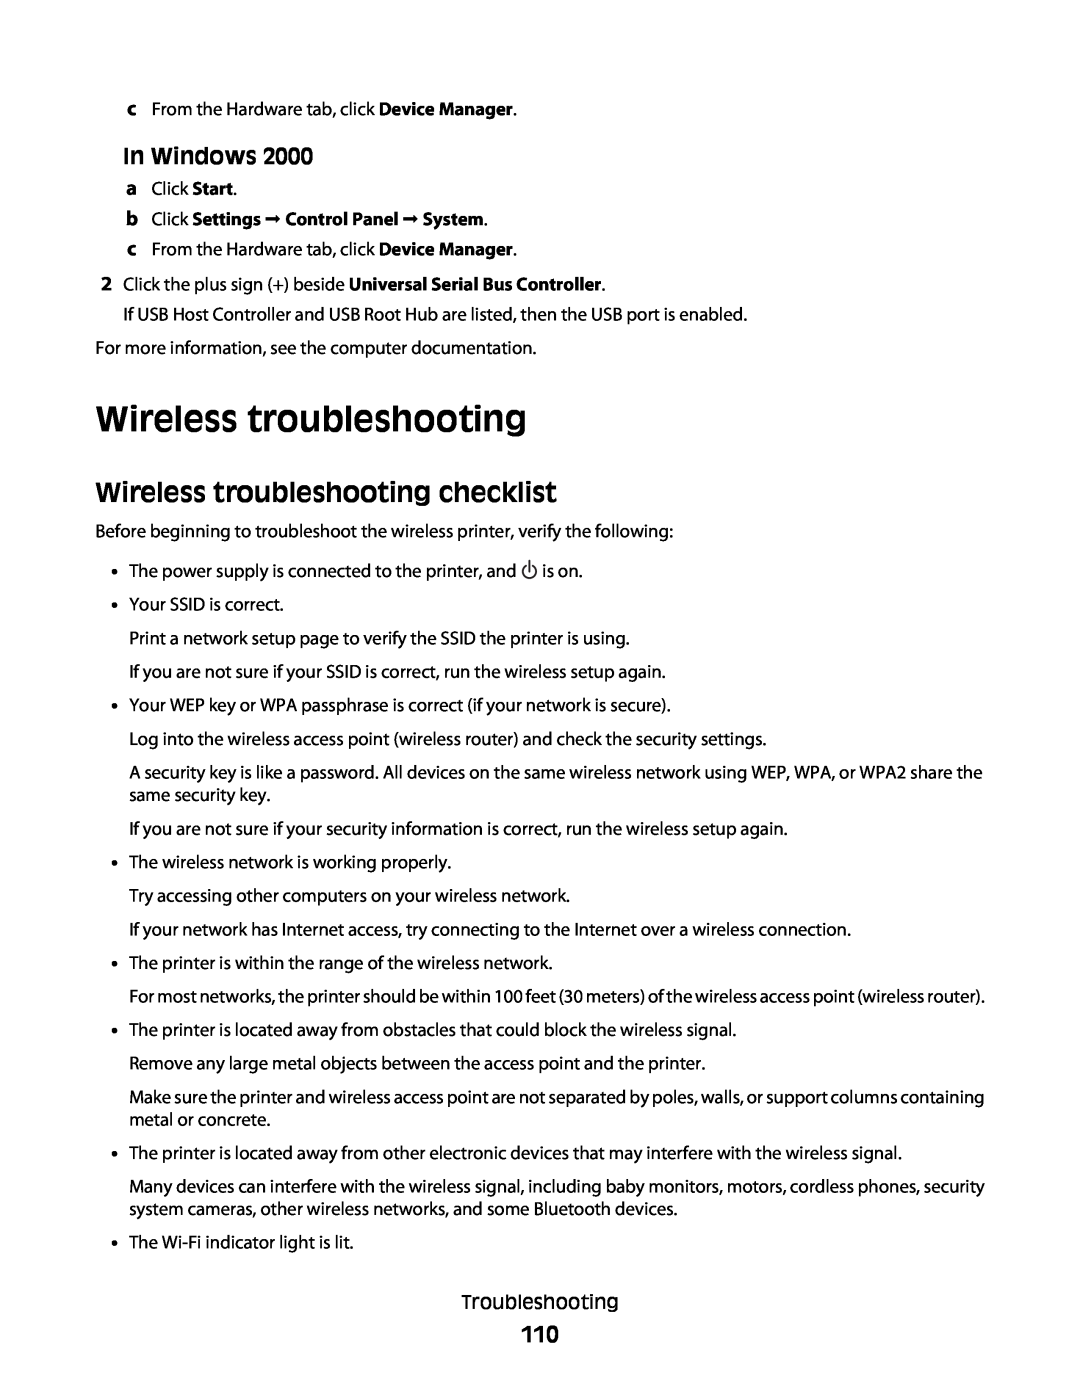 Lexmark 4600, 3600 manual Wireless troubleshooting checklist, In Windows, b Click Settings  Control Panel  System 